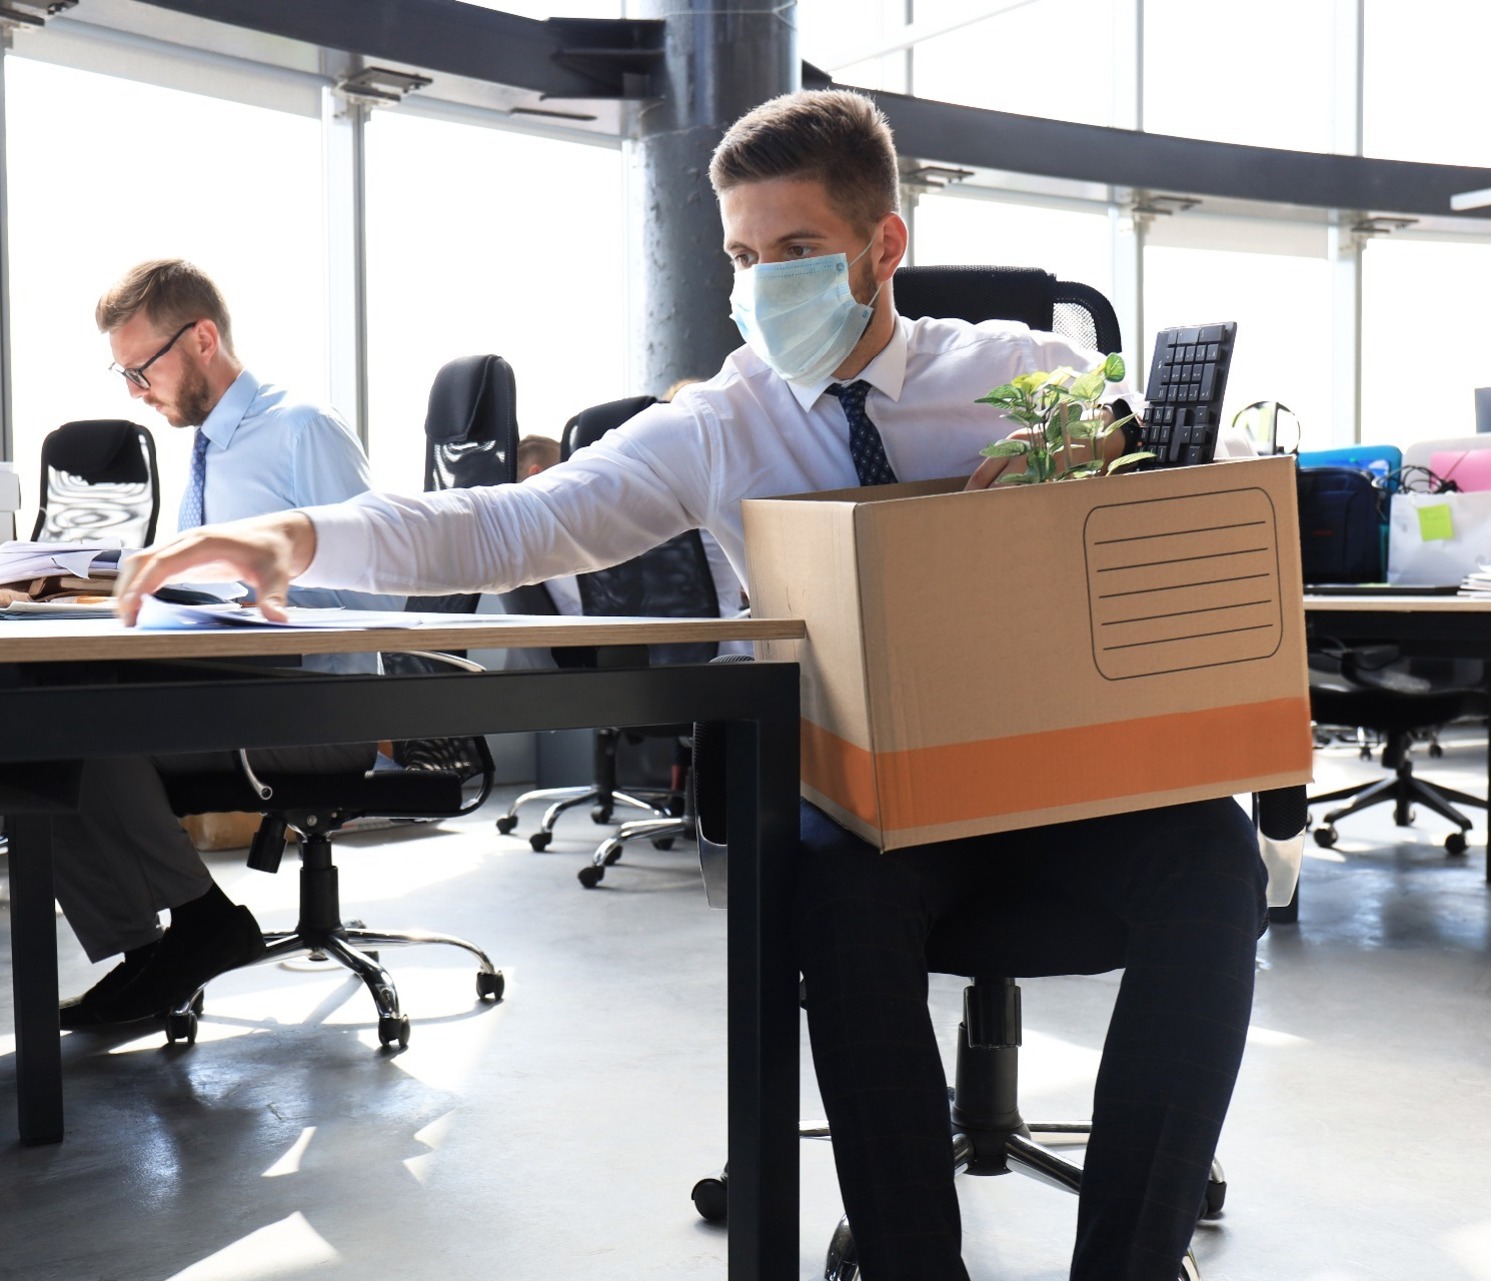 Man wearing a mask clearing his desk after being dismissed